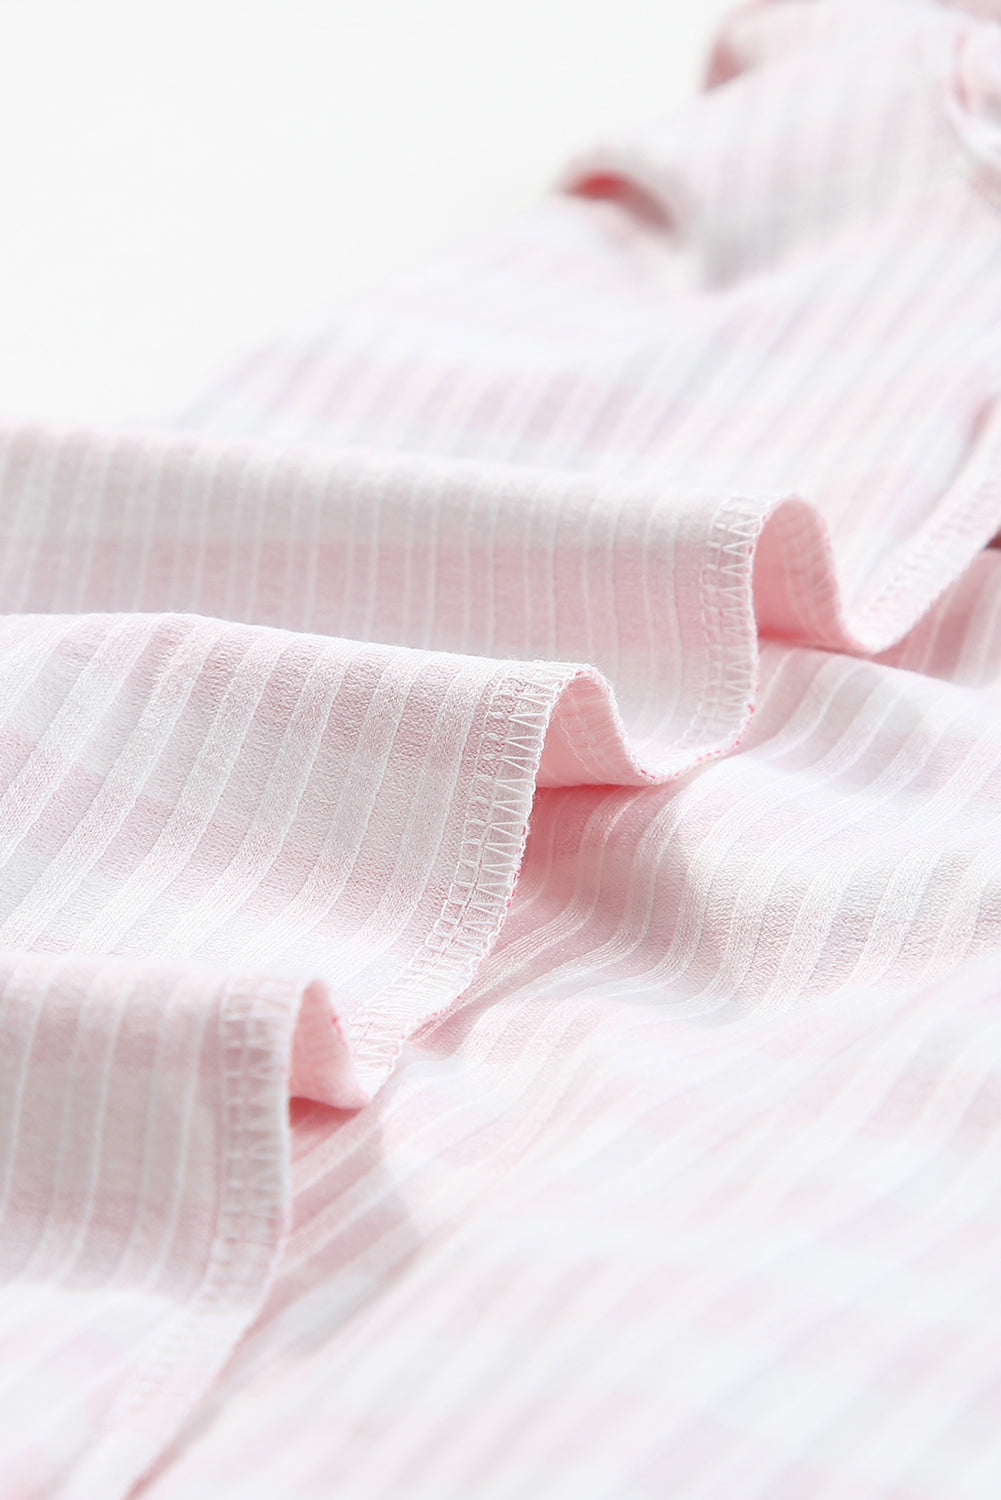 Strawberry Pink Striped Print Textured Knit Long Sleeve Tee